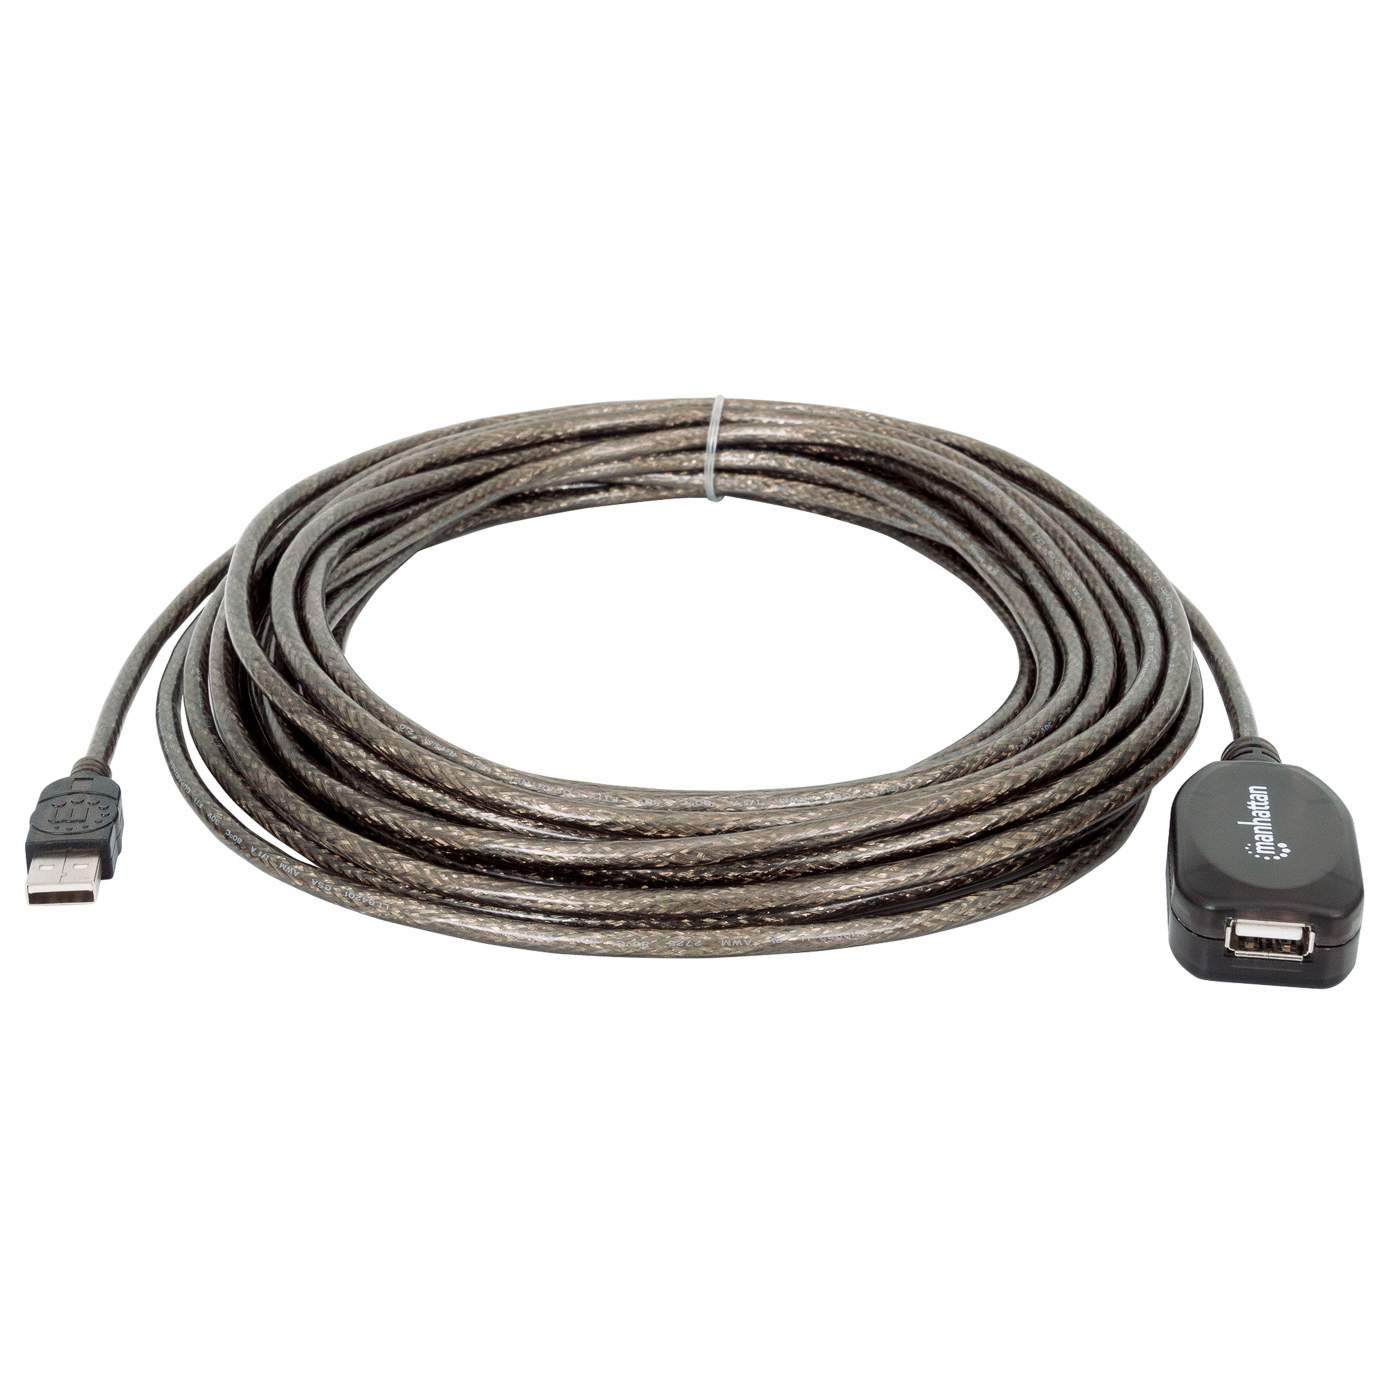 USB 2.0 Active Extension Cable Type A-Male to A-Female Long Cord - 33 Feet